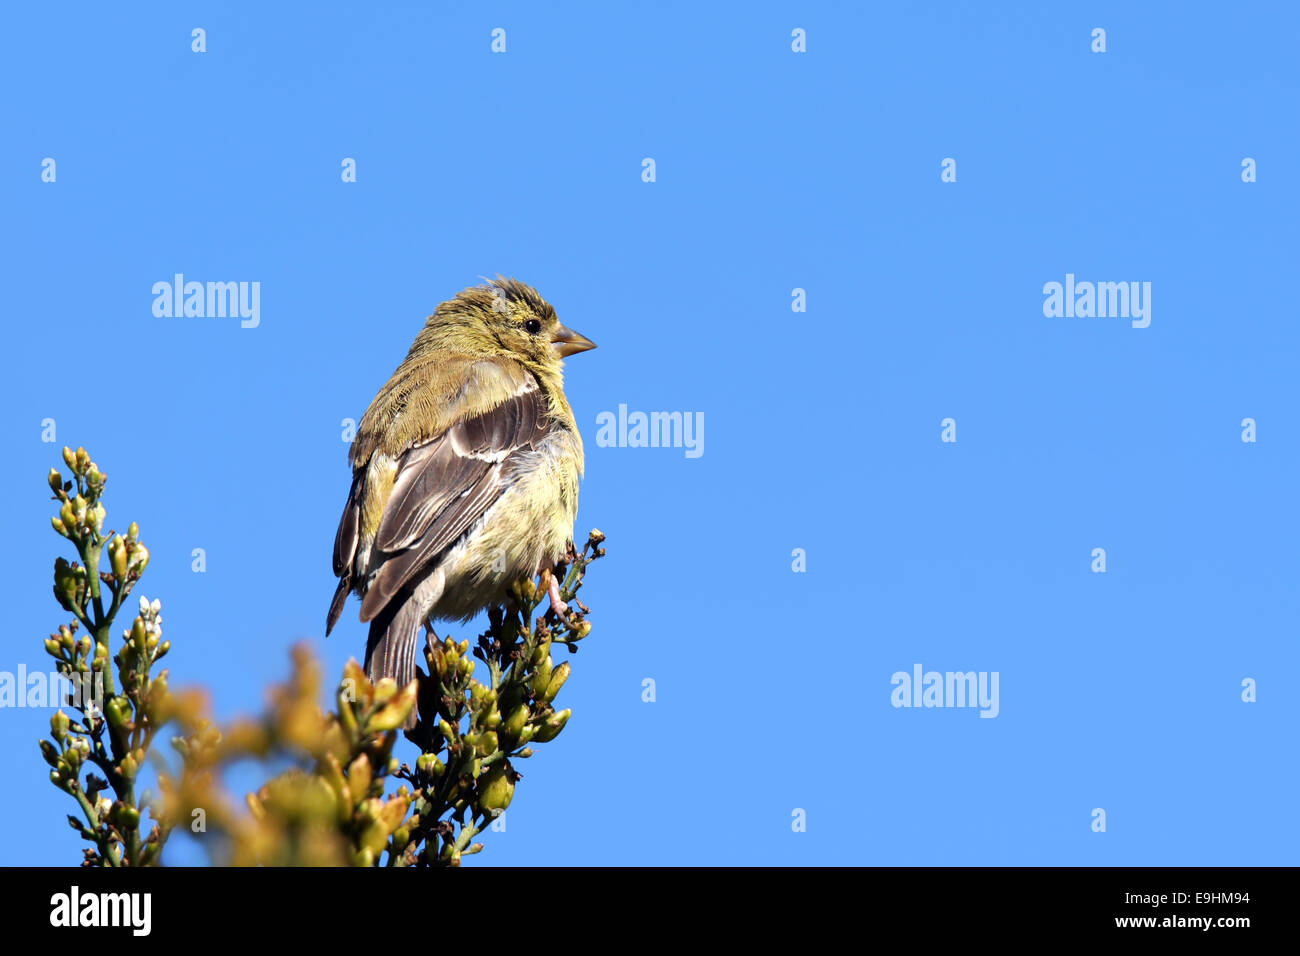 American goldfinch, Carduelis tristis, in winter plumage over brigh blue sky. Stock Photo